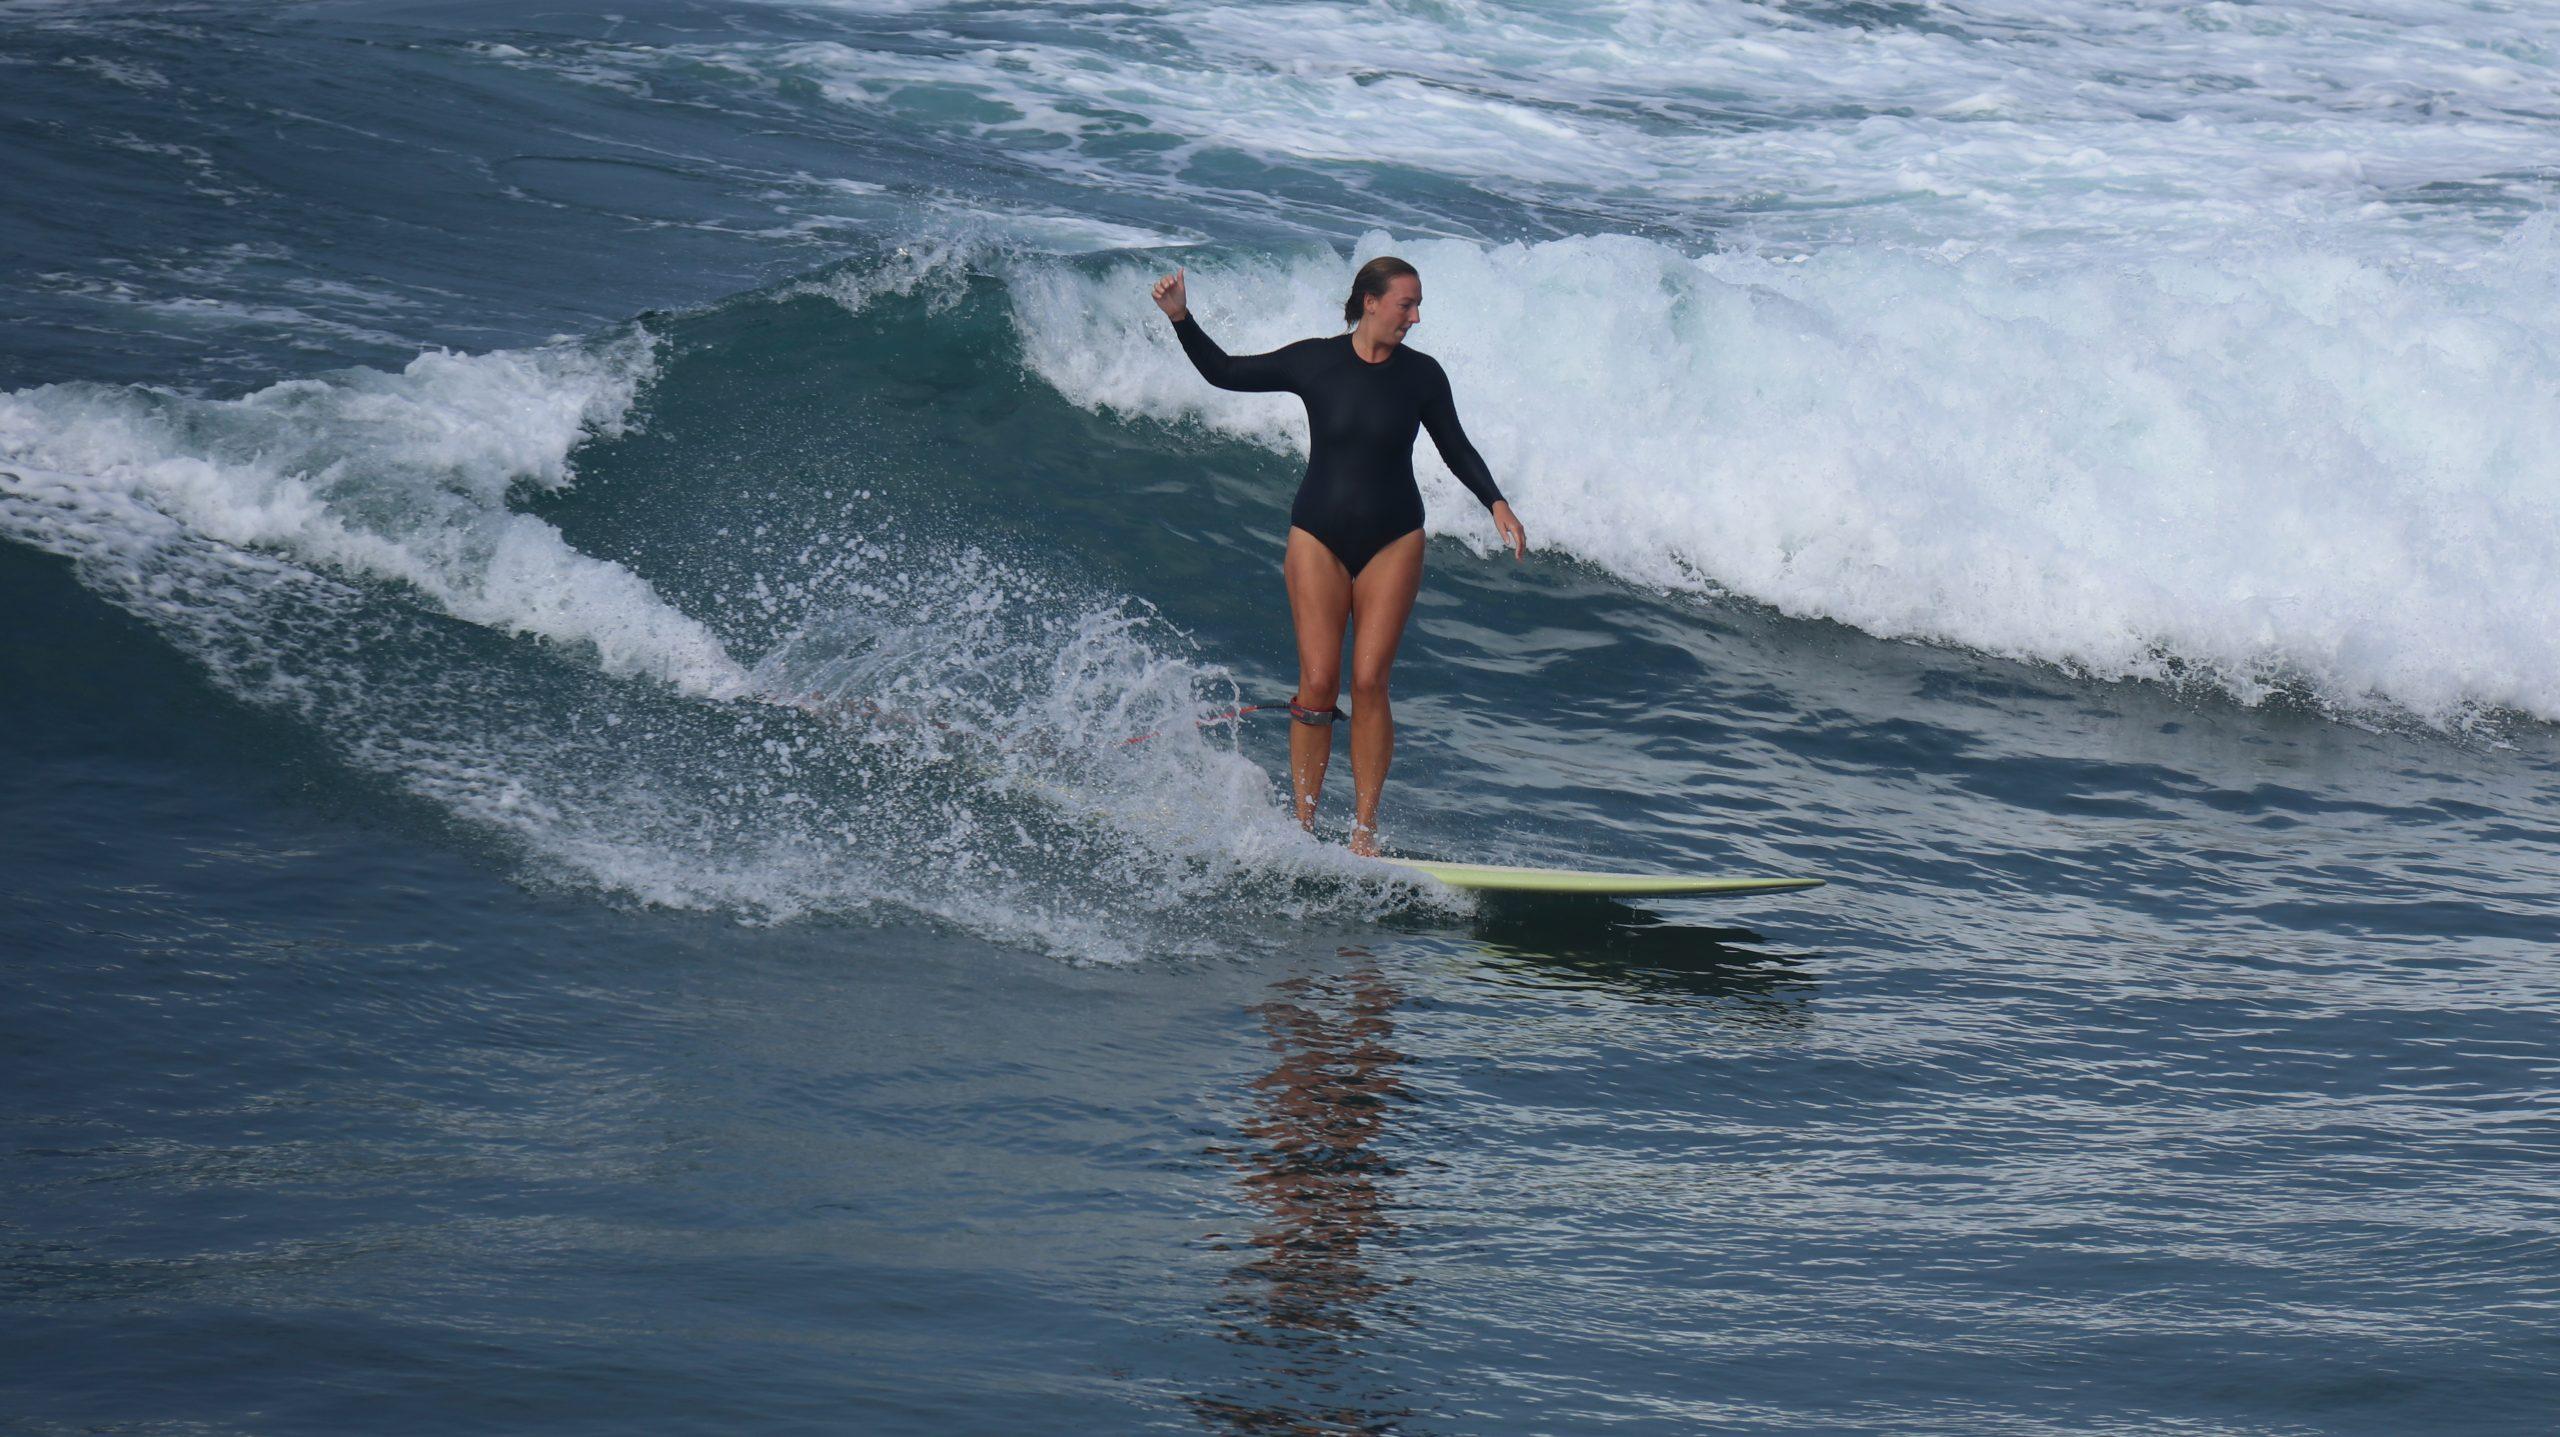 Anita’s Surfing Journey – Trying Harder, Or At Least Not Giving Up.